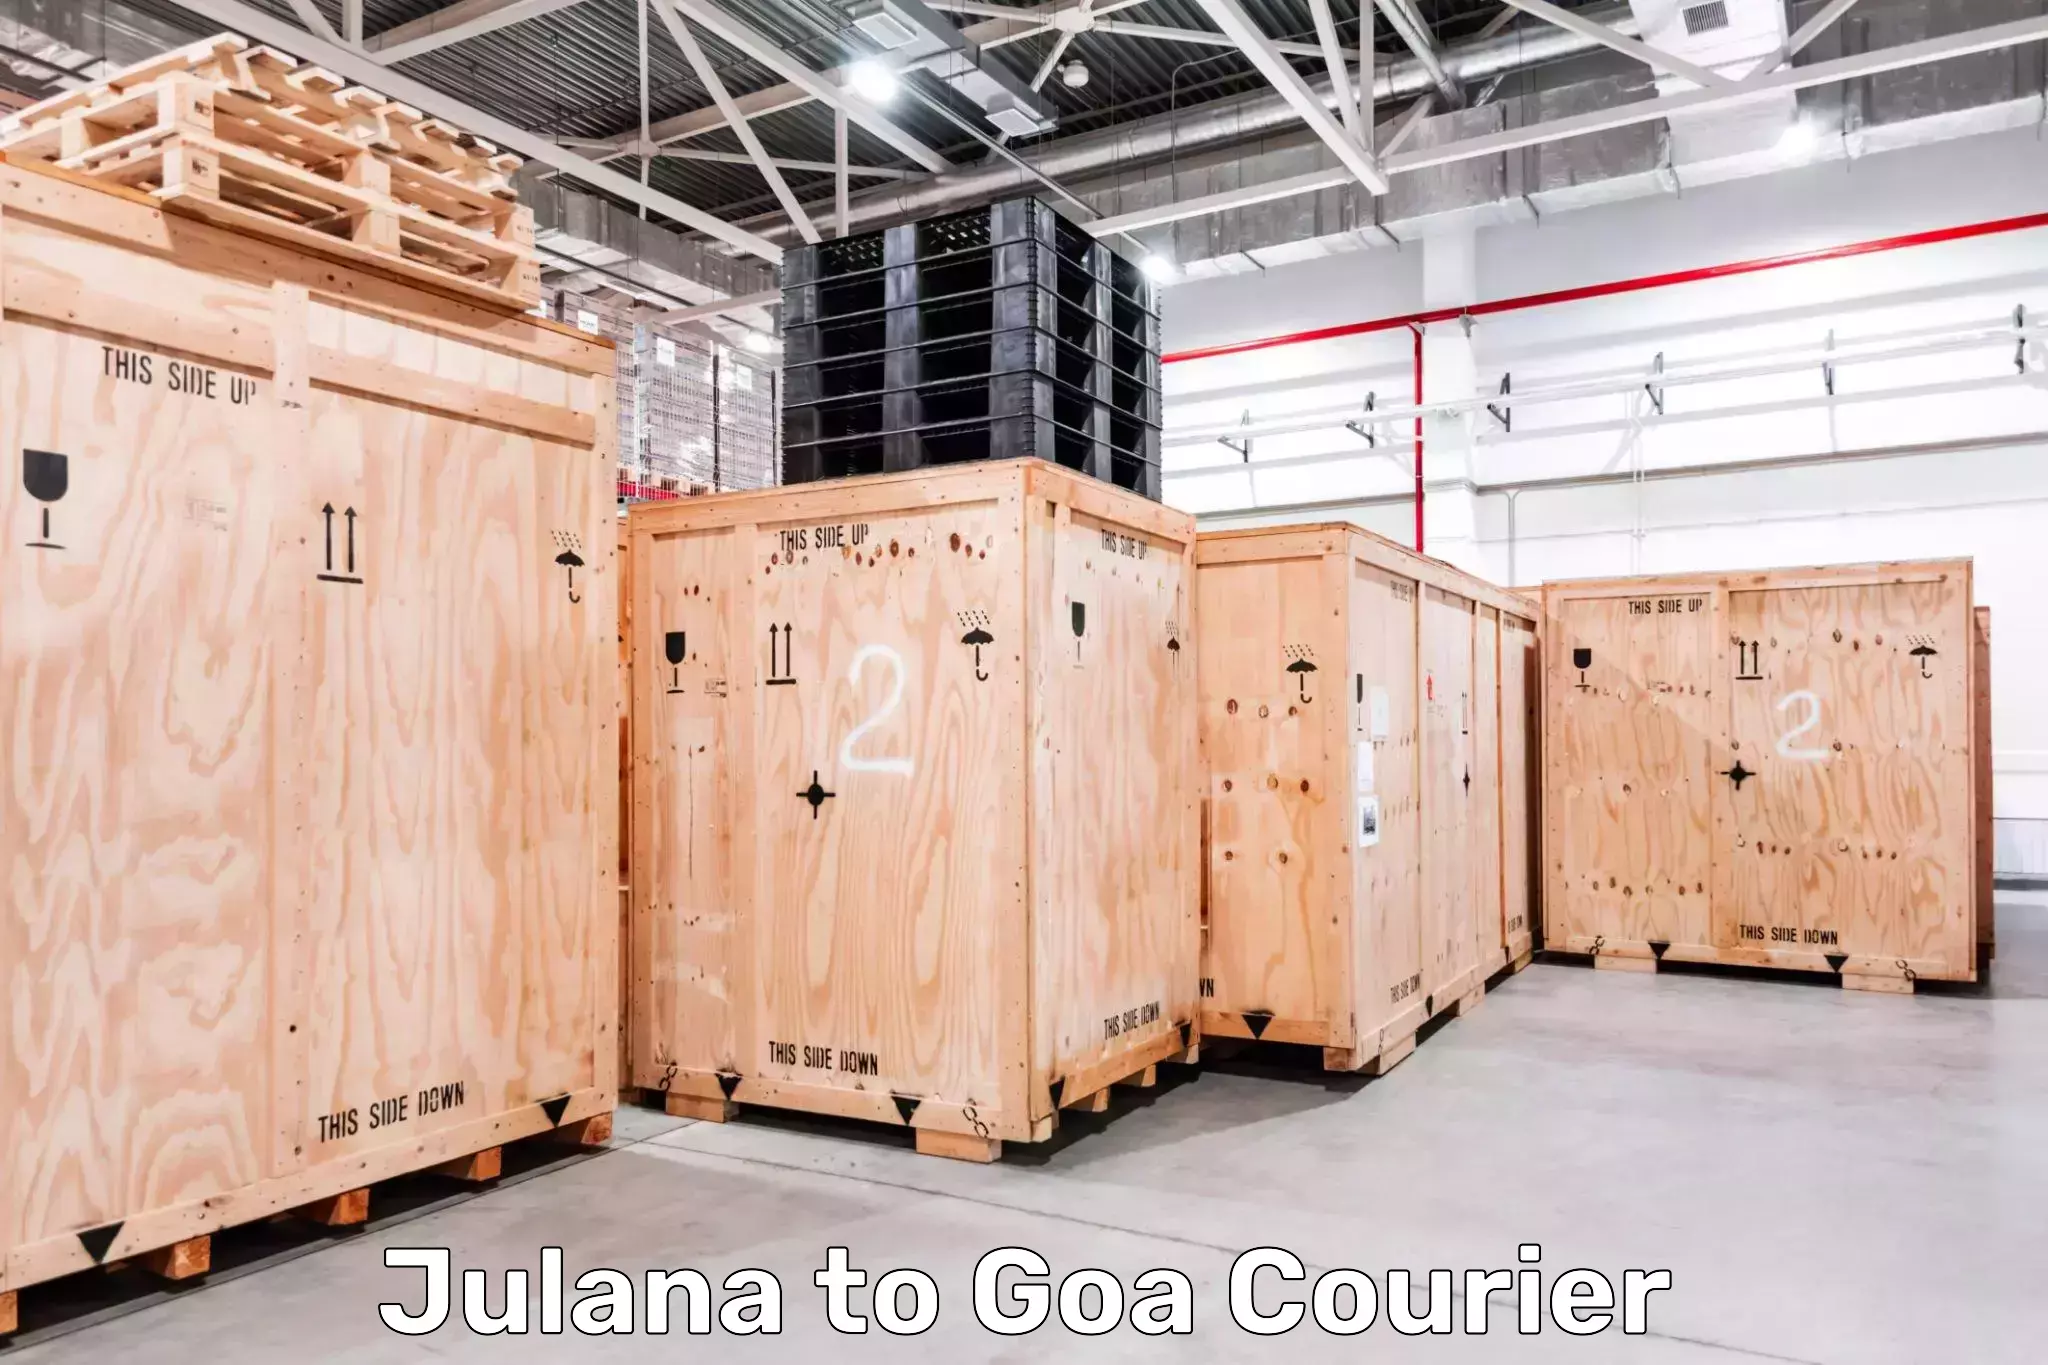 Scheduled delivery Julana to Goa